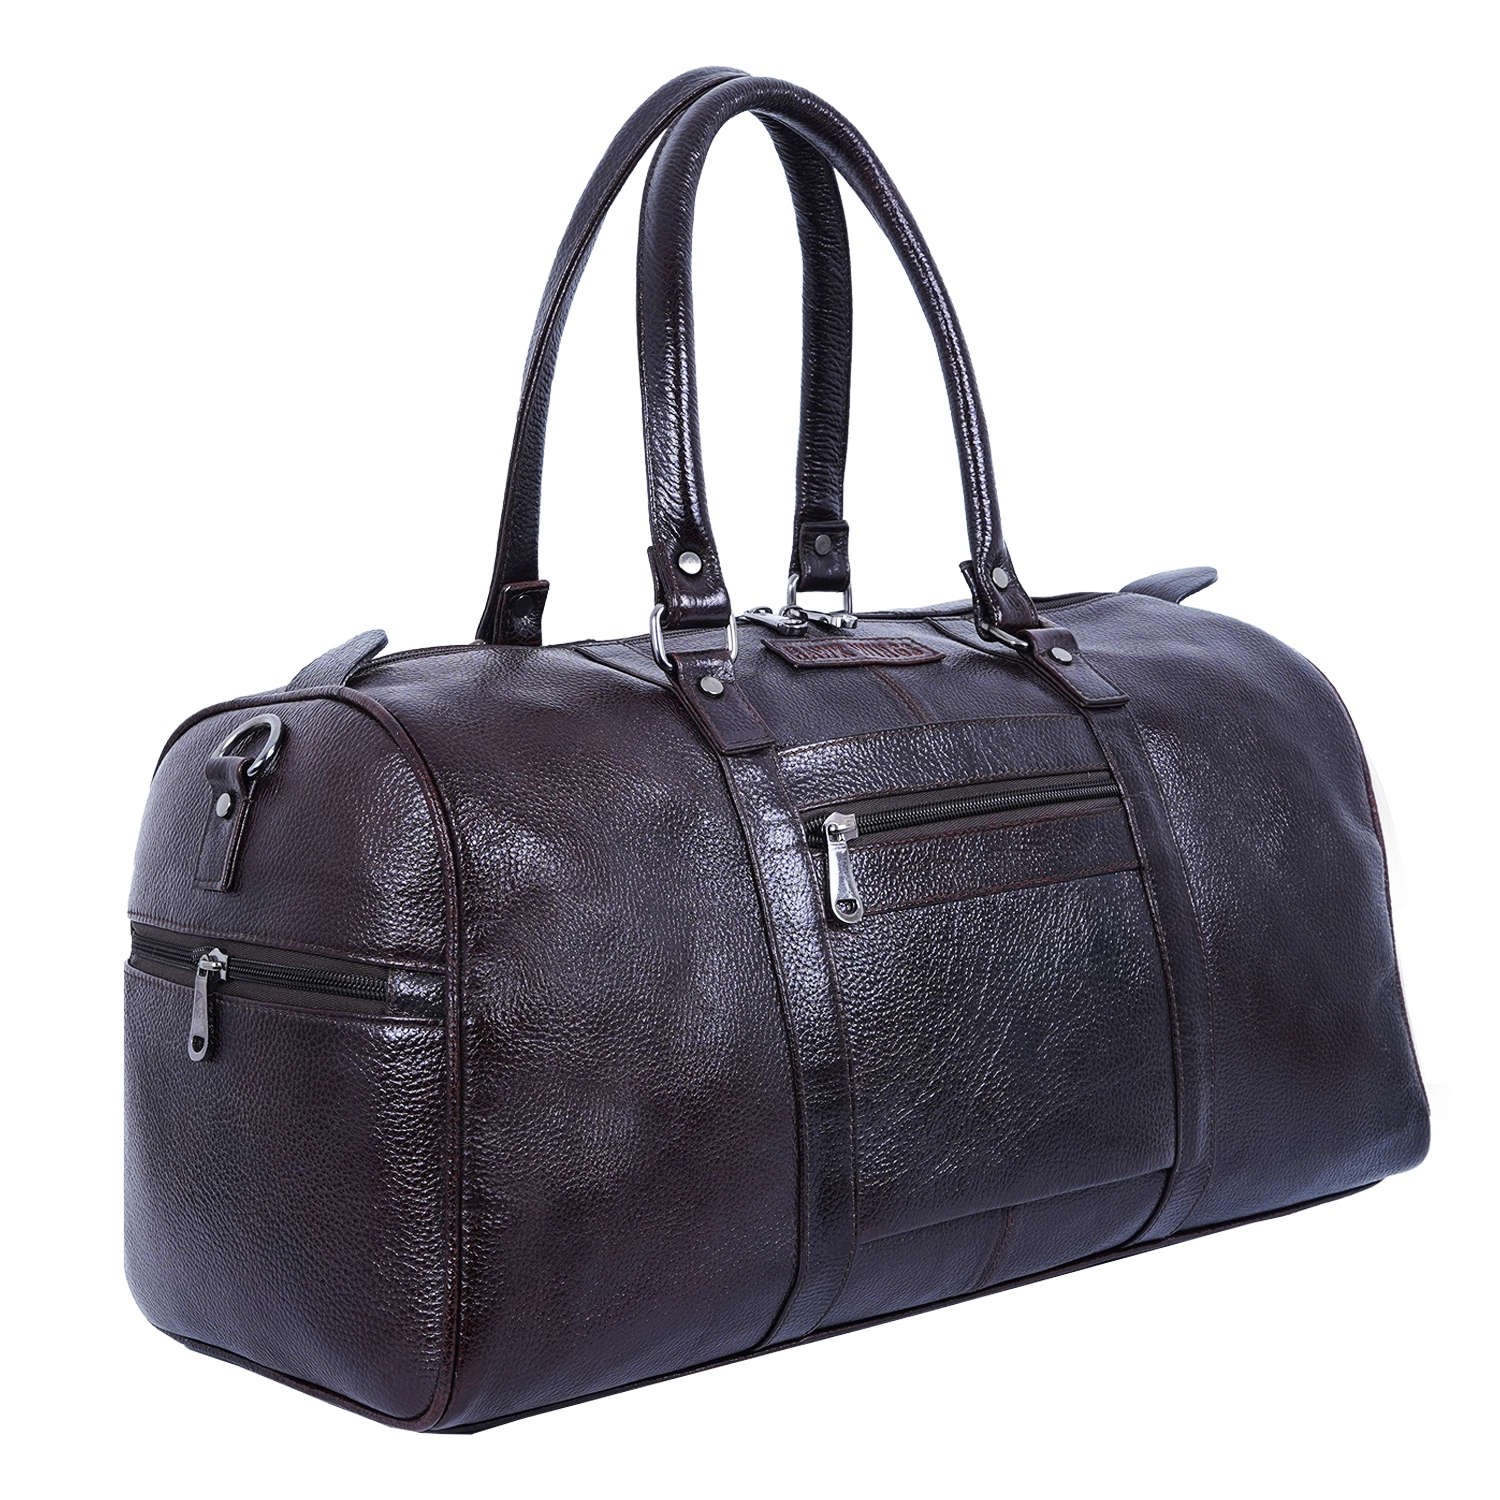 Leather Travel Duffle Bag for Men Women - Leather Duffel Carry on Overnight Weekender Bags (Brown)